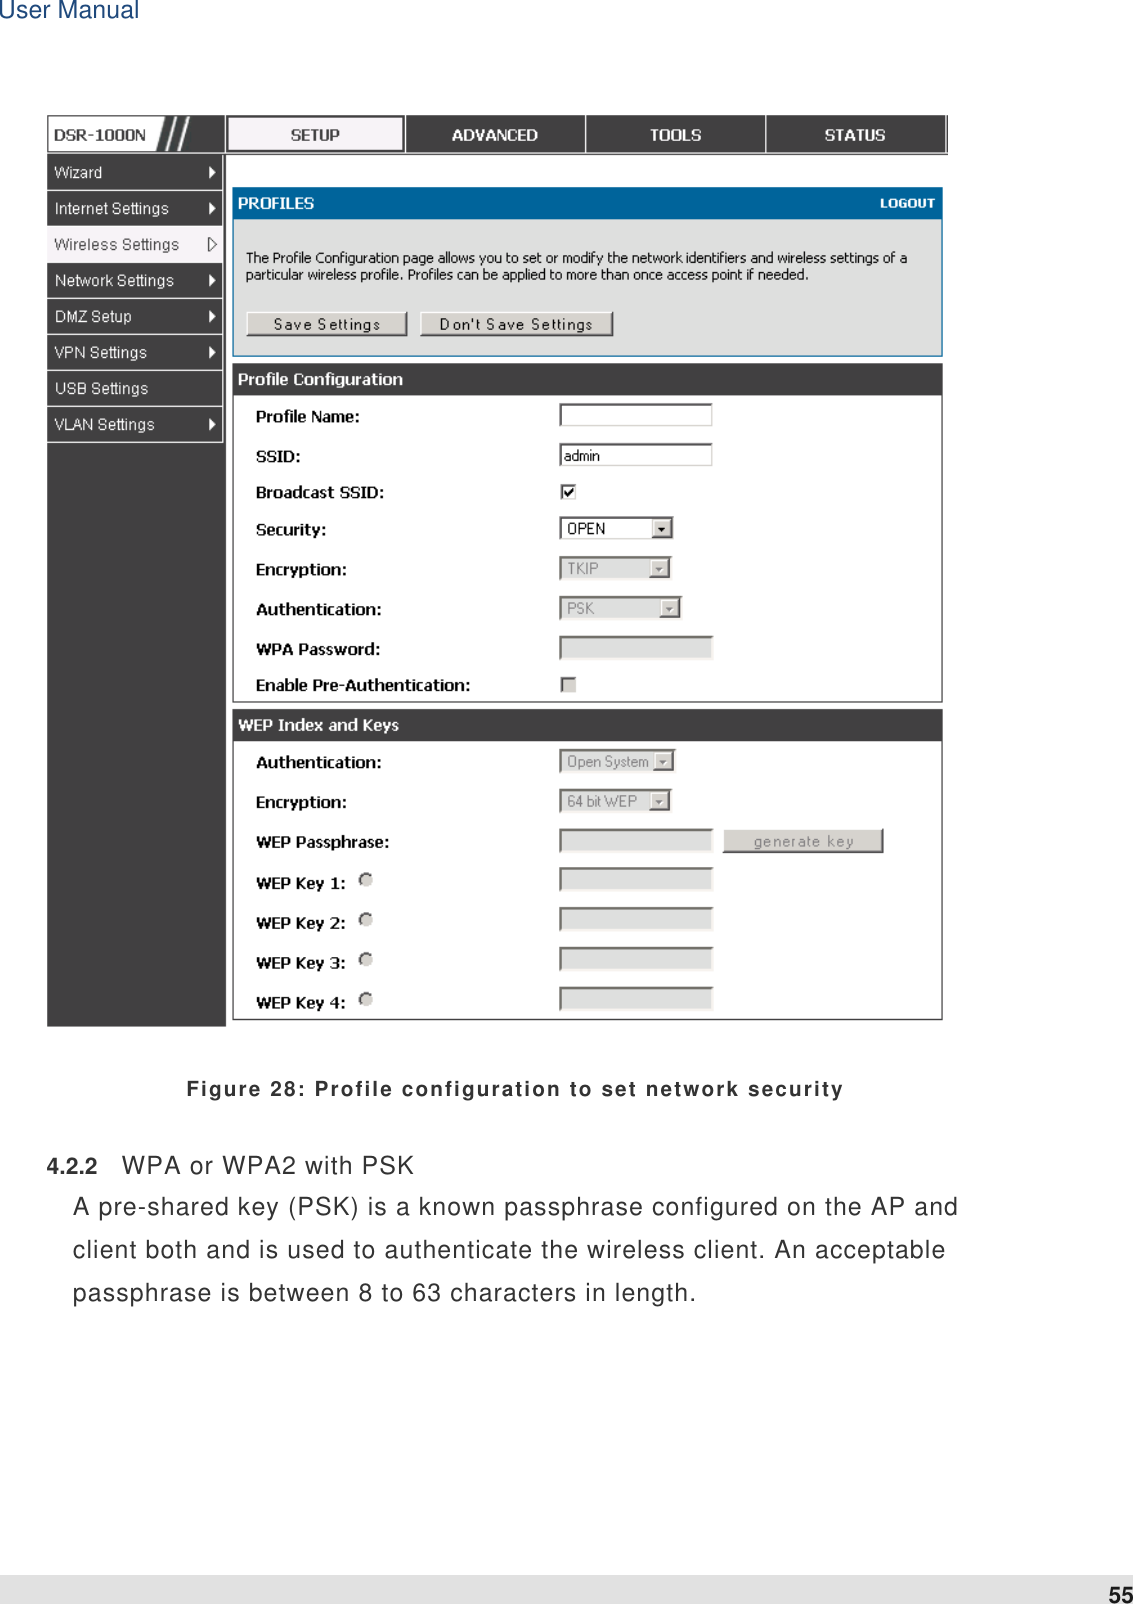 User Manual 55    Figure 28: Profile configuration to set network security 4.2.2  WPA or WPA2 with PSK A pre-shared key (PSK) is a known passphrase configured on the AP and client both and is used to authenticate the wireless client. An acceptable passphrase is between 8 to 63 characters in length.   